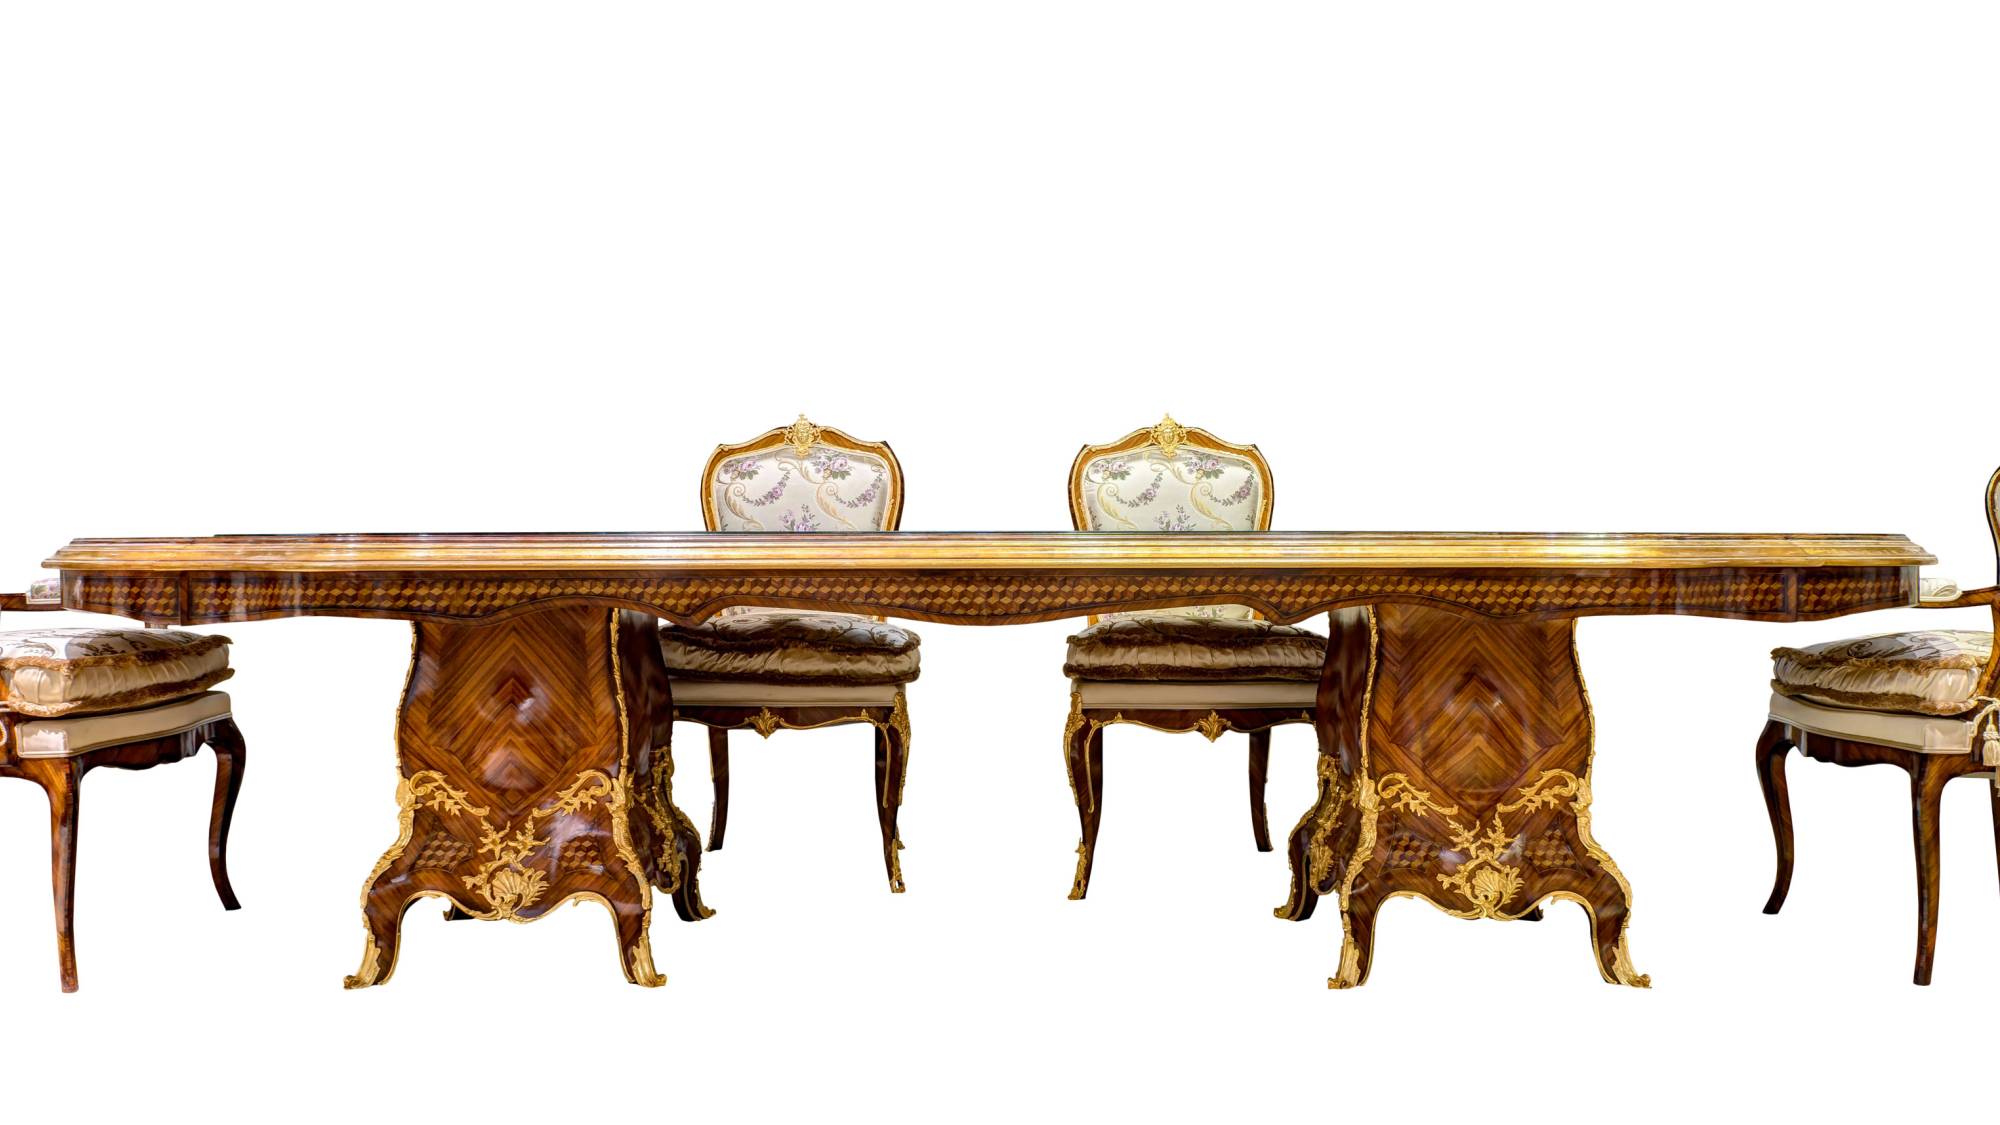 ART. 1094-5 - C.G. Capelletti quality furniture and timeless elegance with luxury made in italy contemporary Tables.